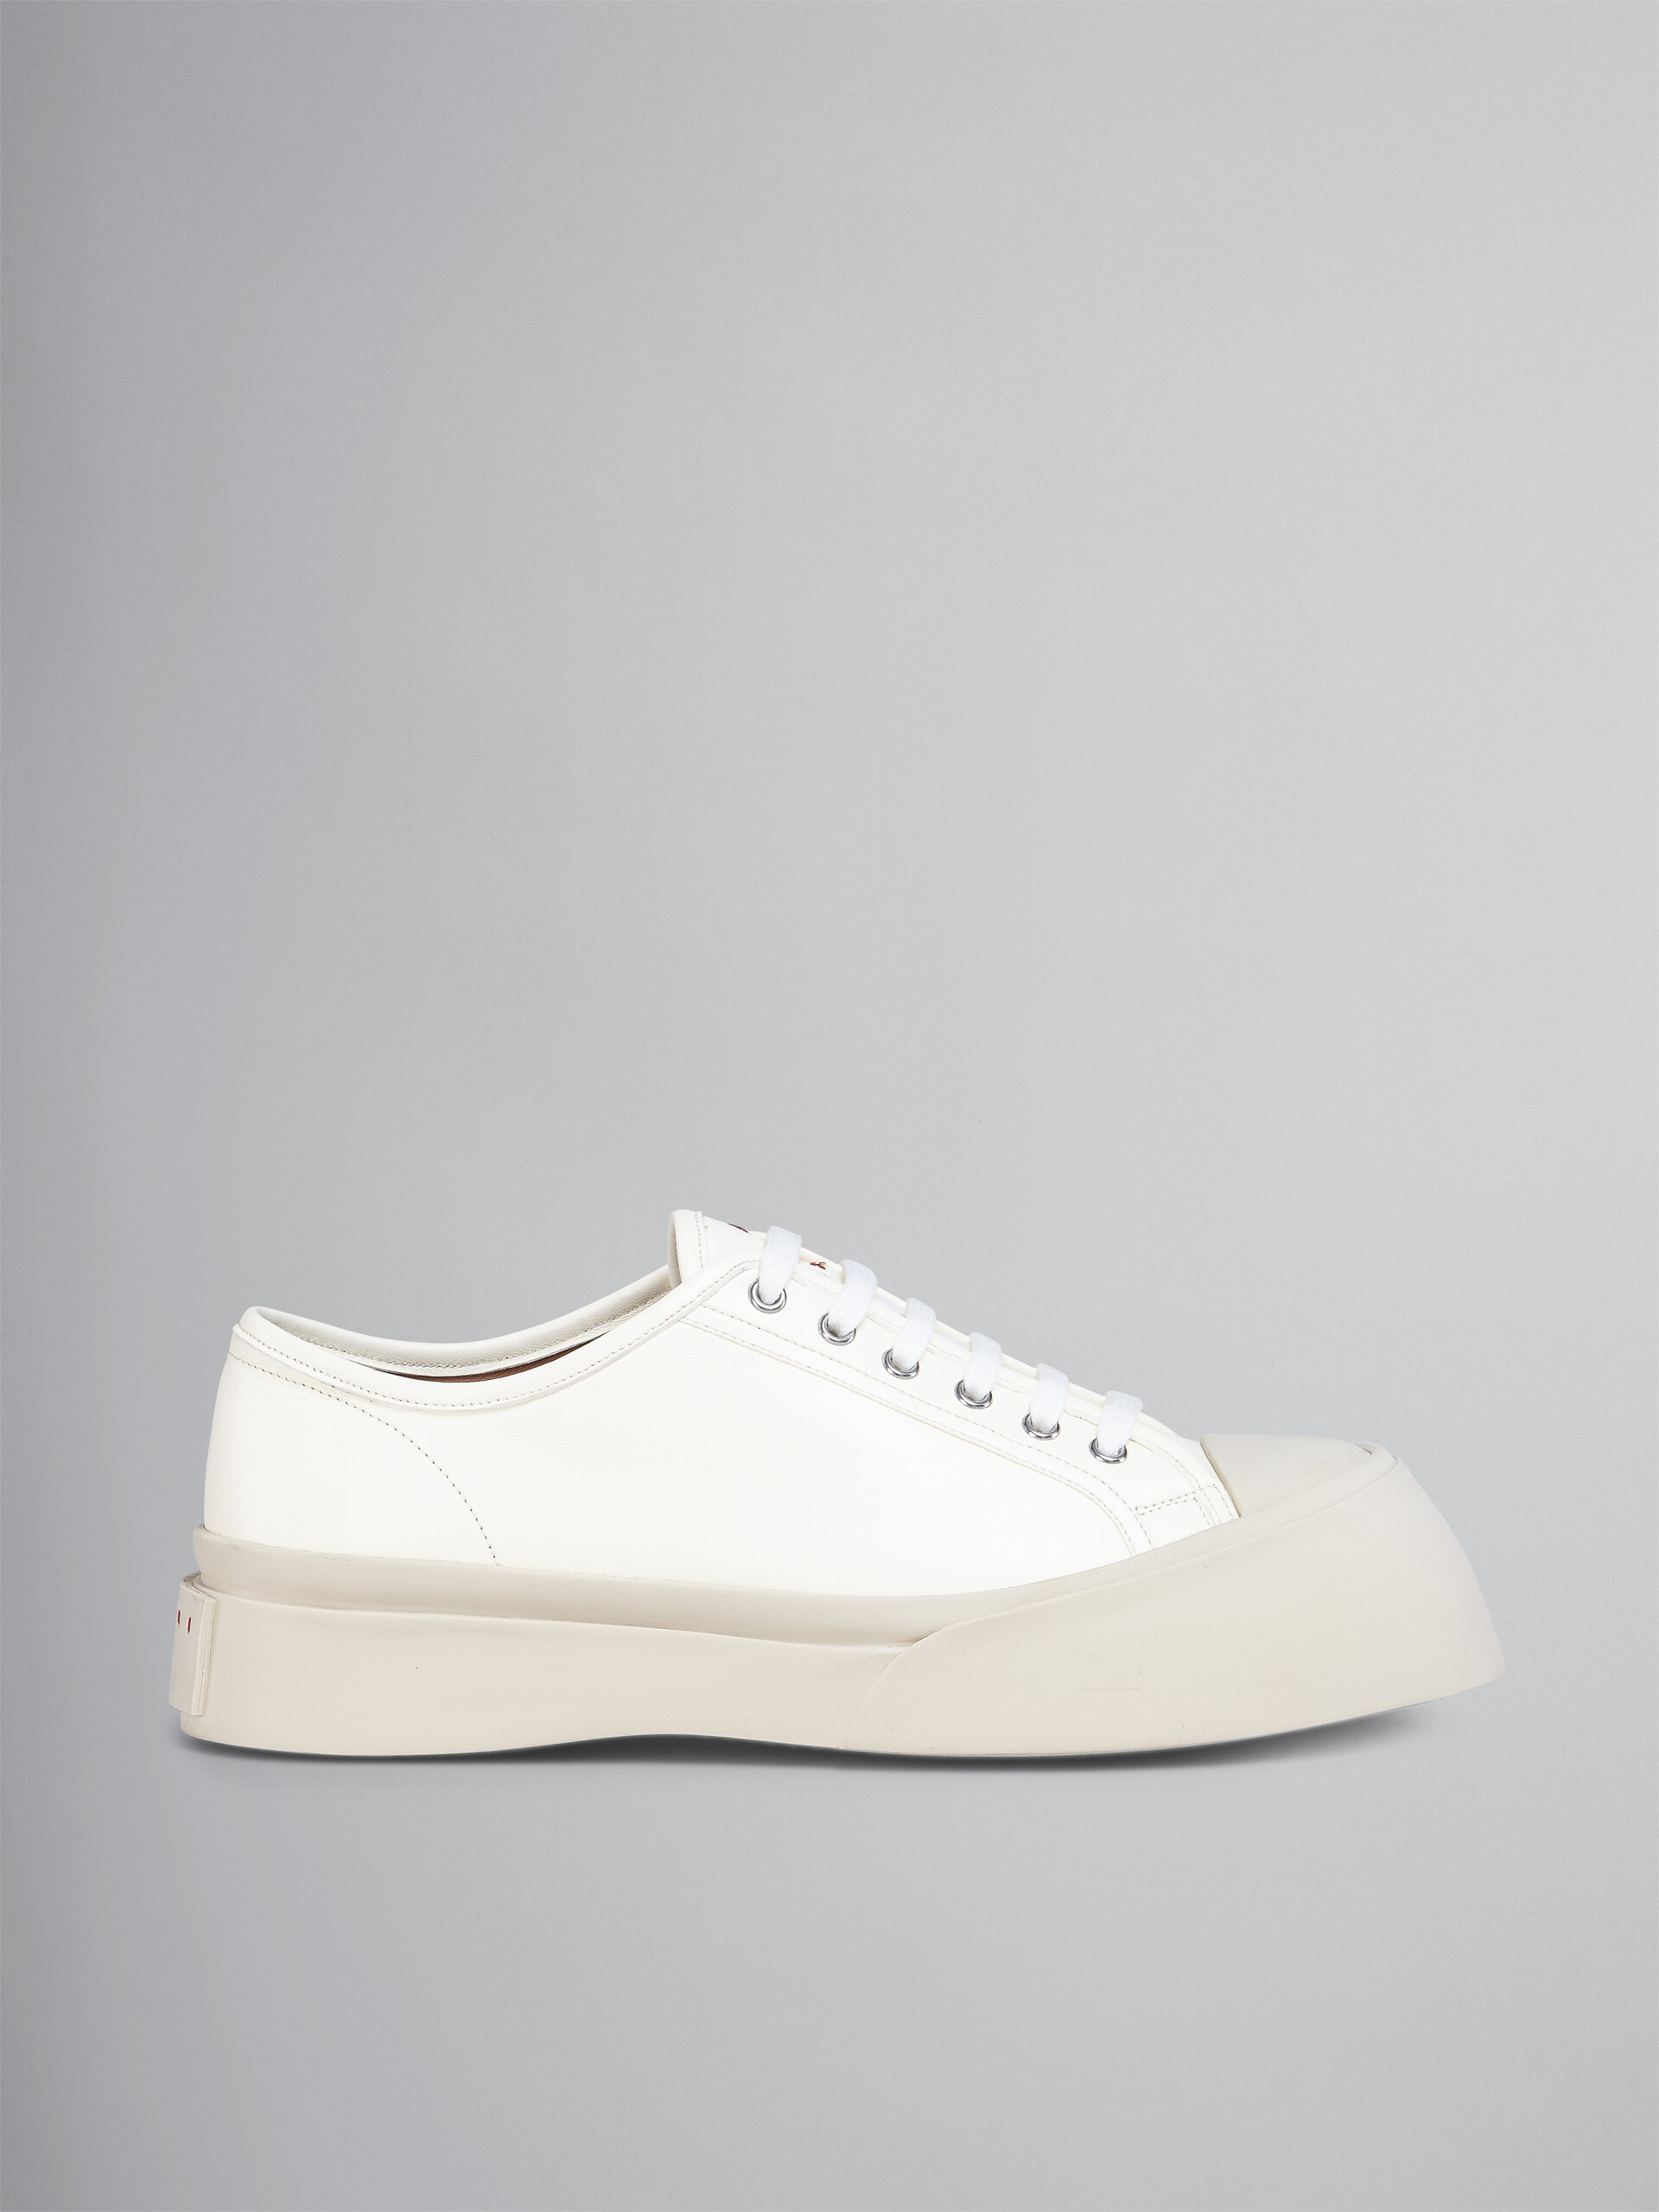 White leather PABLO sneaker - Sneakers - Image 1